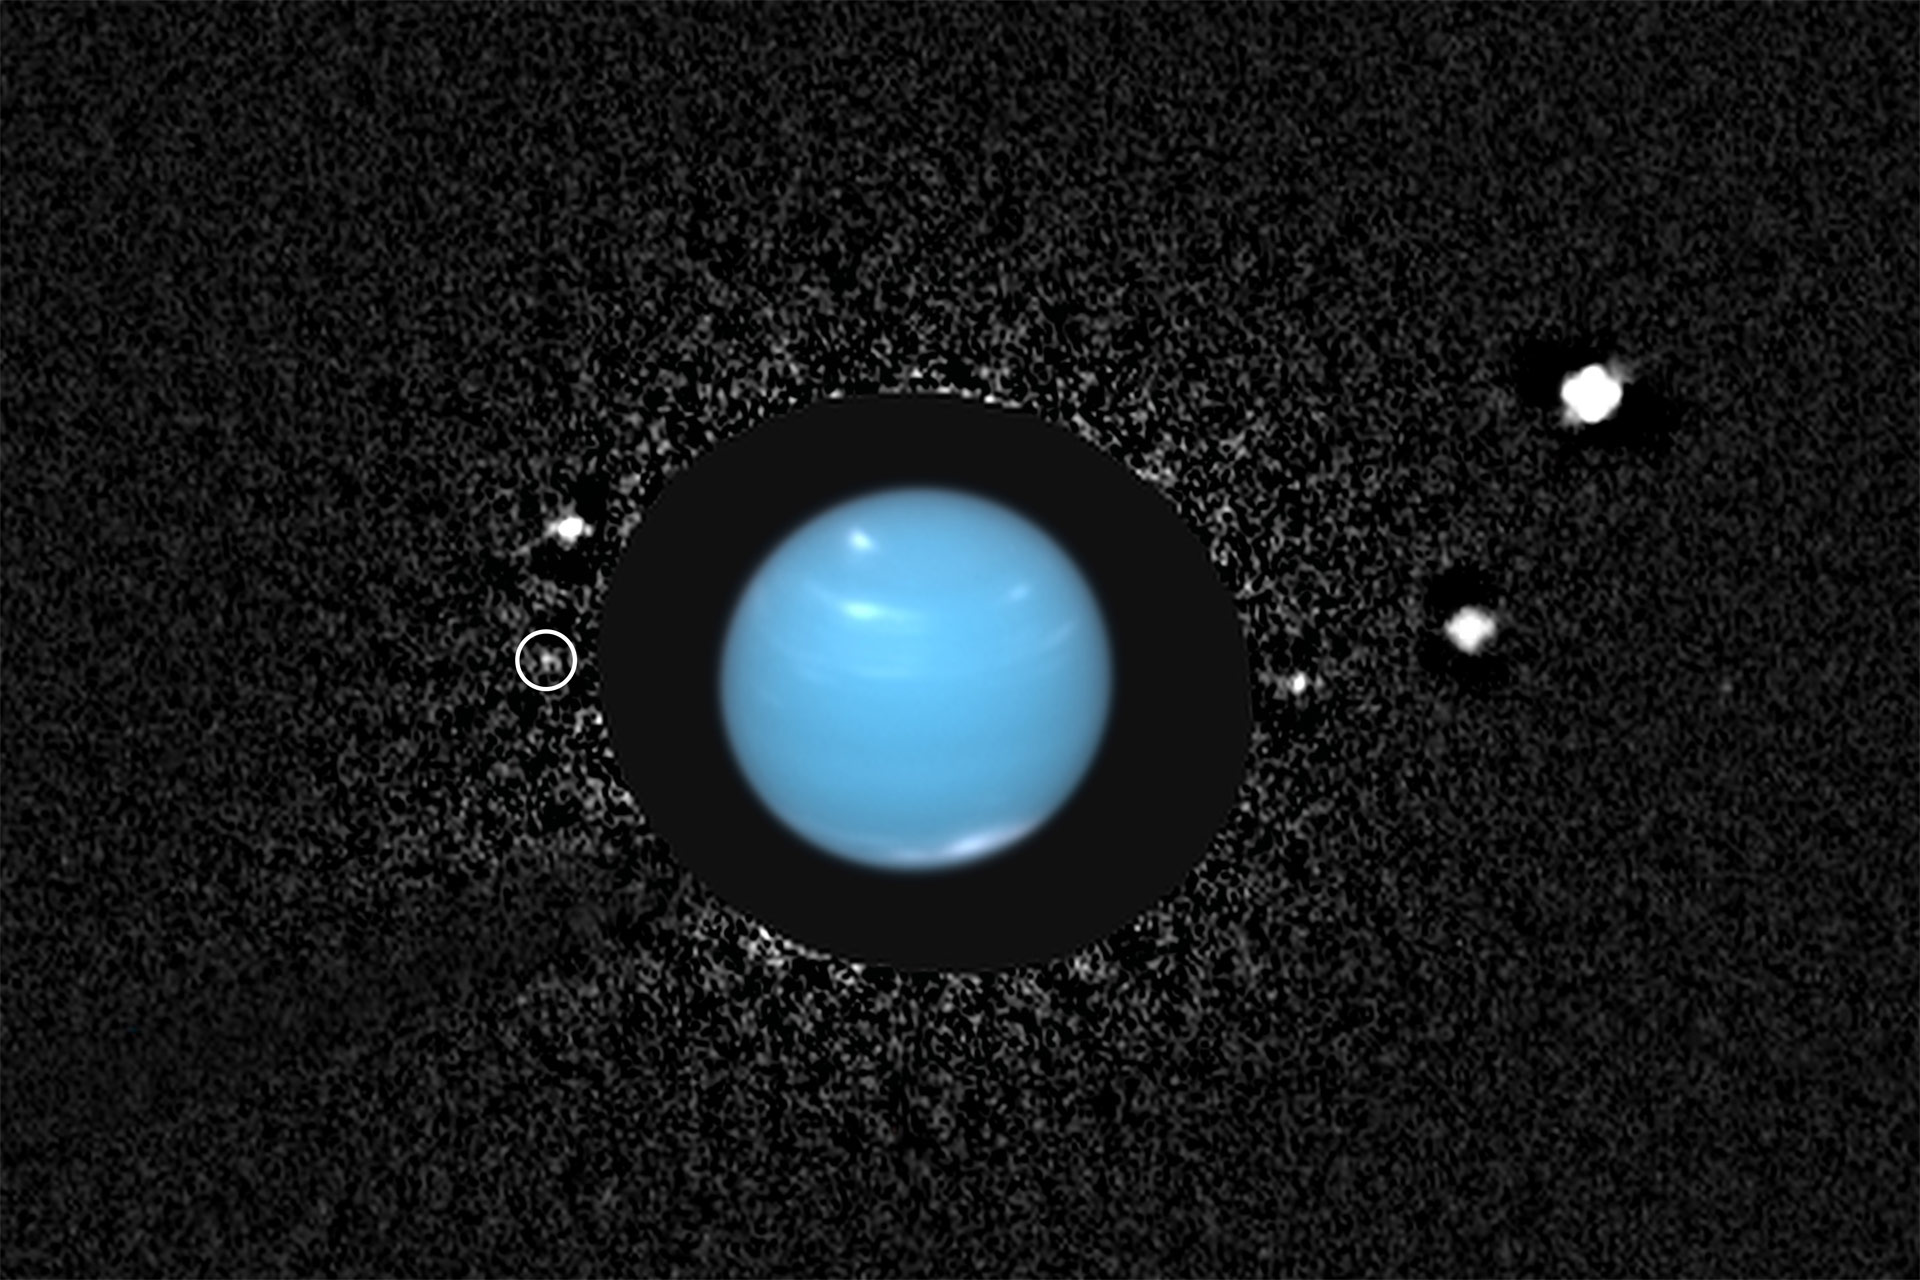 Old Hubble Images Reveal Neptune's “Lost” Moon